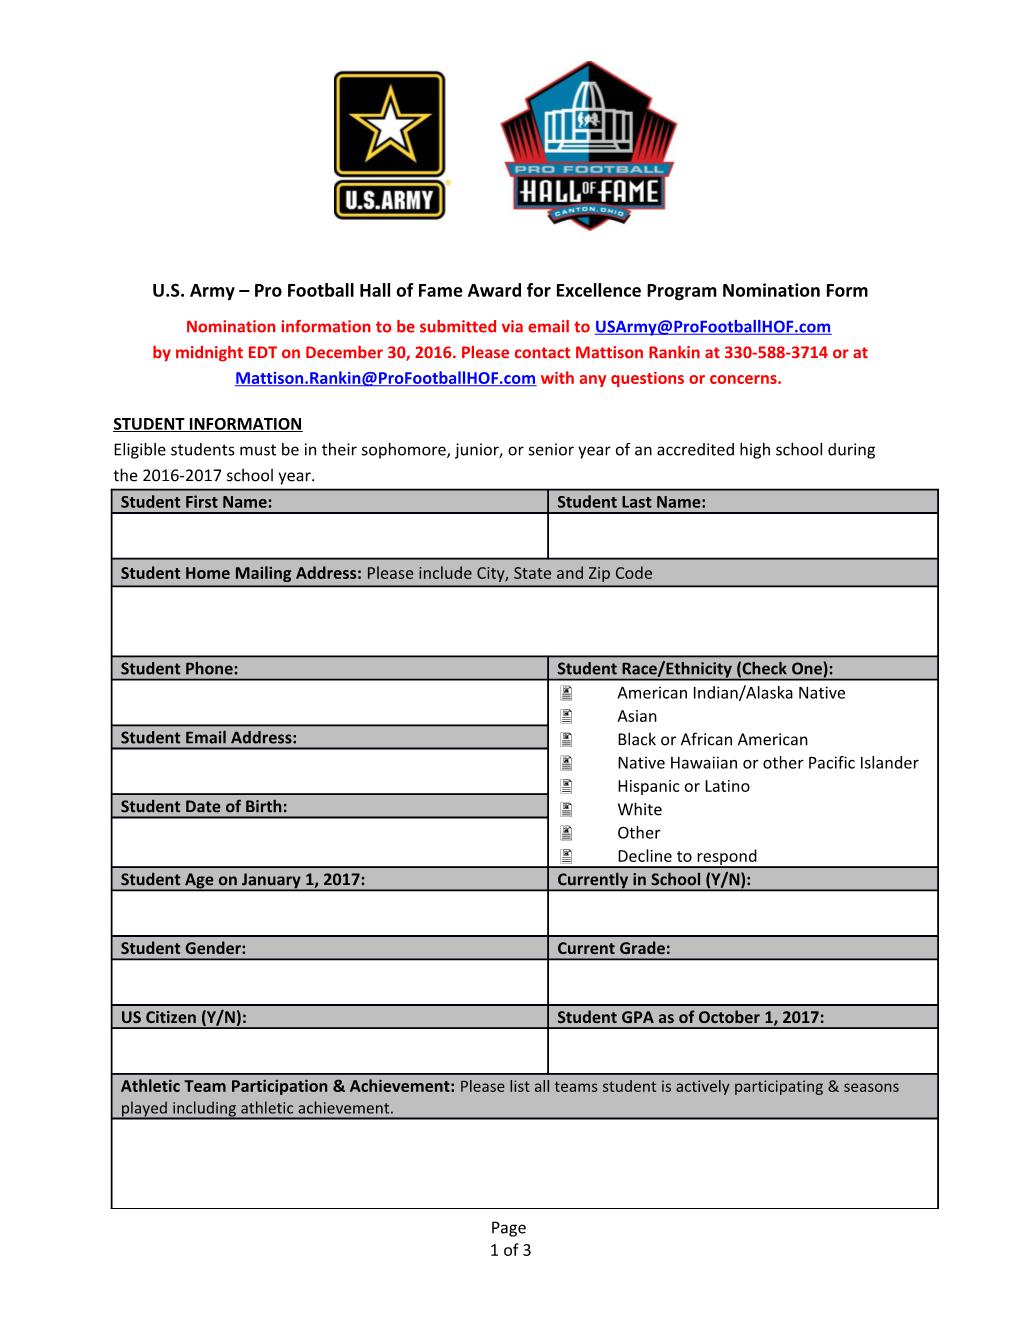 U.S. Army Pro Football Hall of Fame Award for Excellence Program Nomination Form